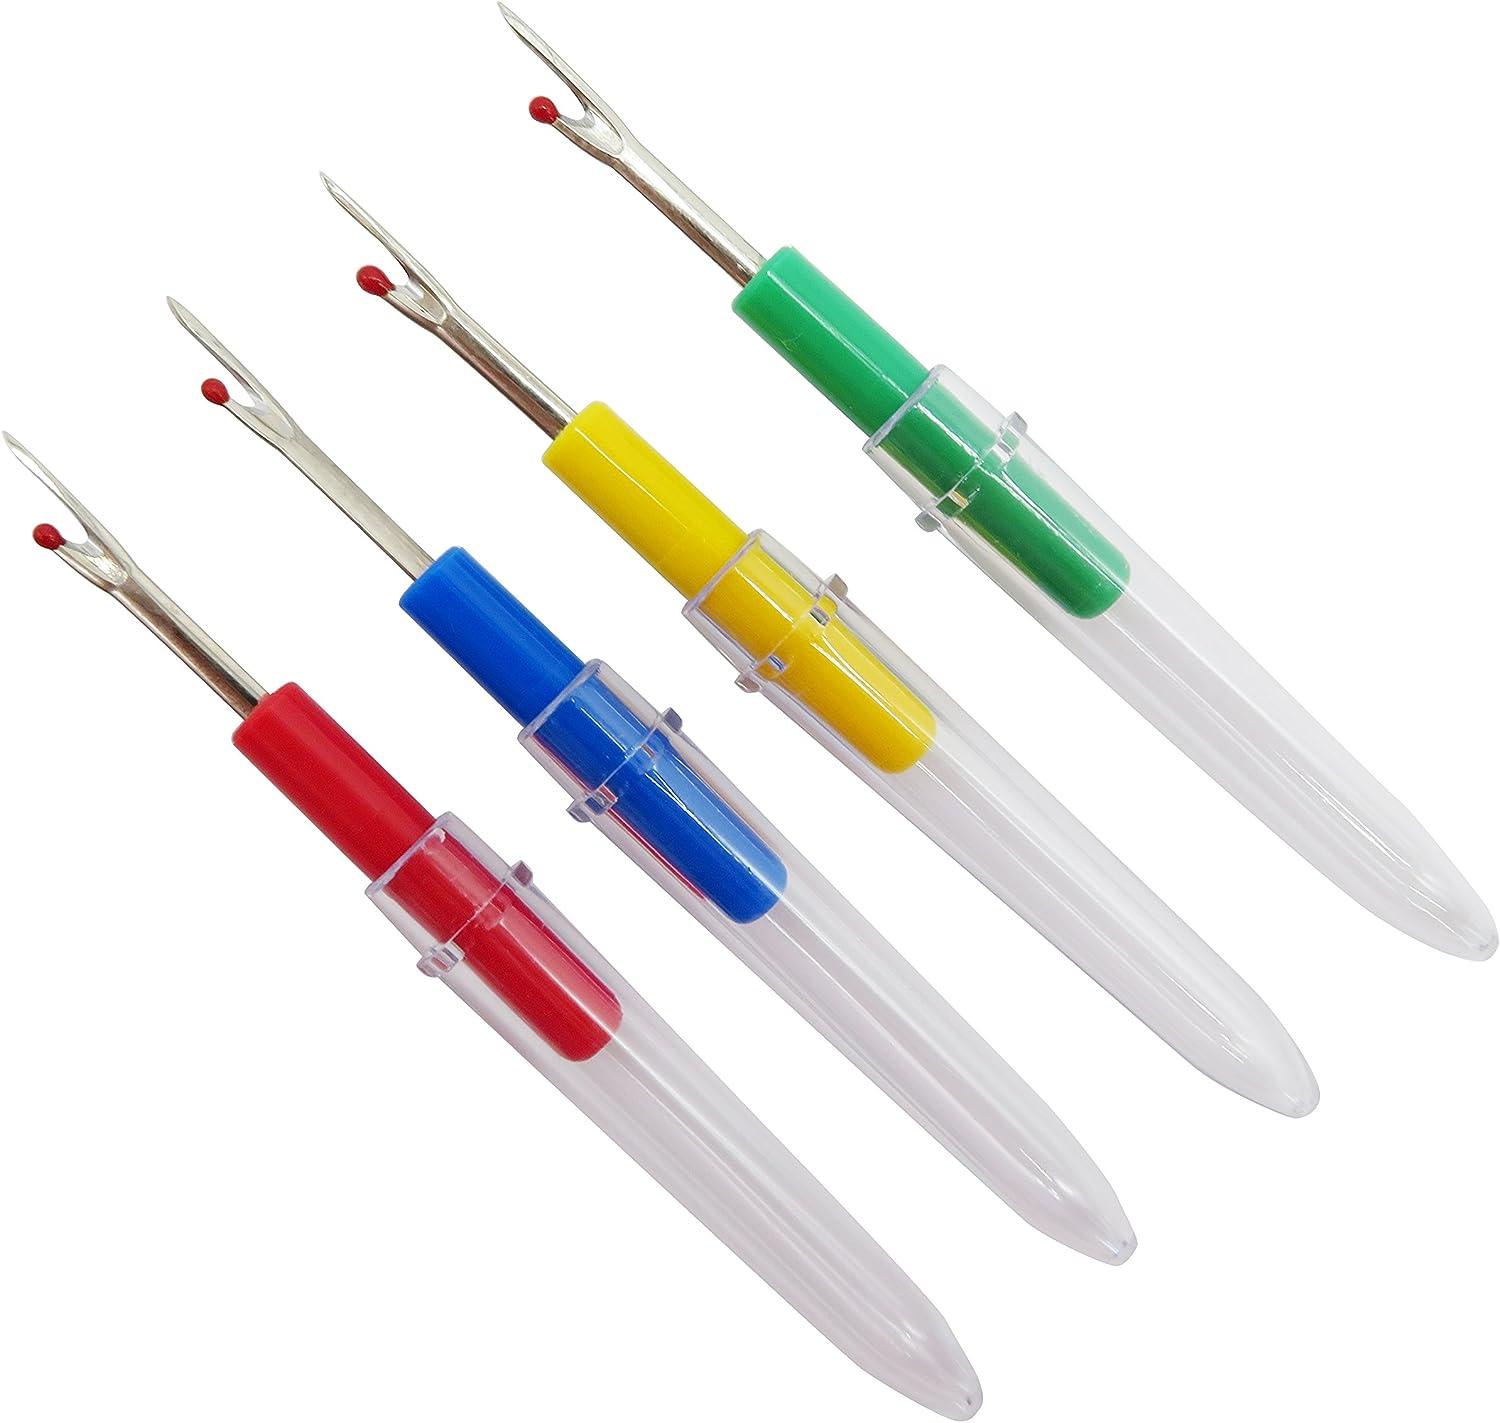 DOACT 4Pcs Seam Ripper Hand Sewing Stitch DIY Tool Color Plastic Handle  Stitch Supplies Small,Cross Stitch Ripper,Seam Ripper